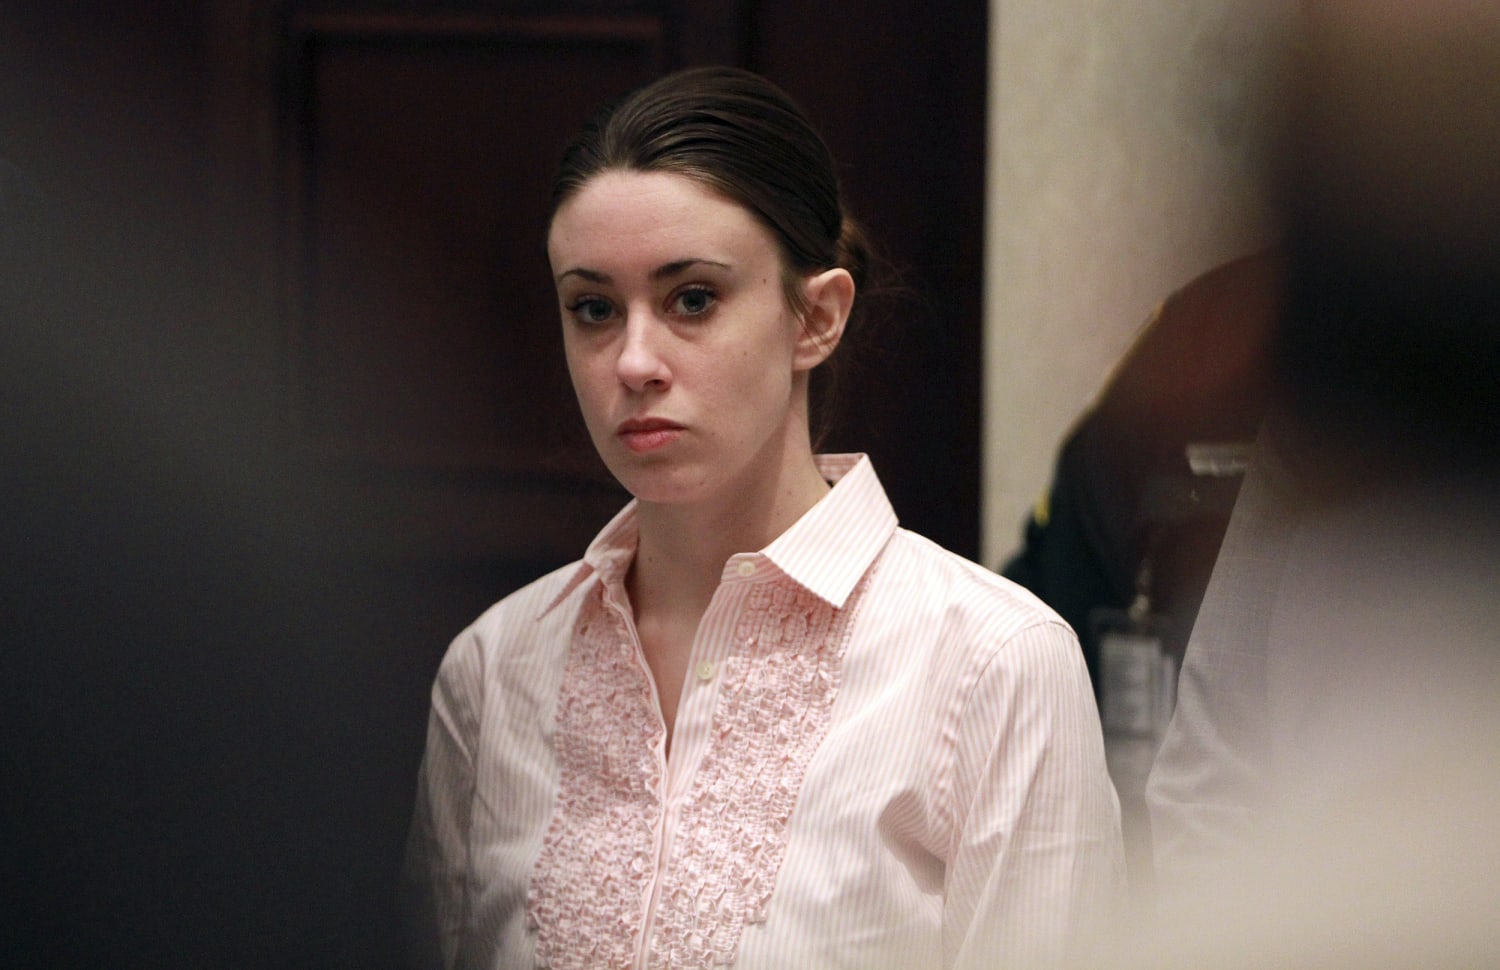 Casey Anthony ended Joy Behar’s HLN talk show, she says on ‘The View’ “Liar”